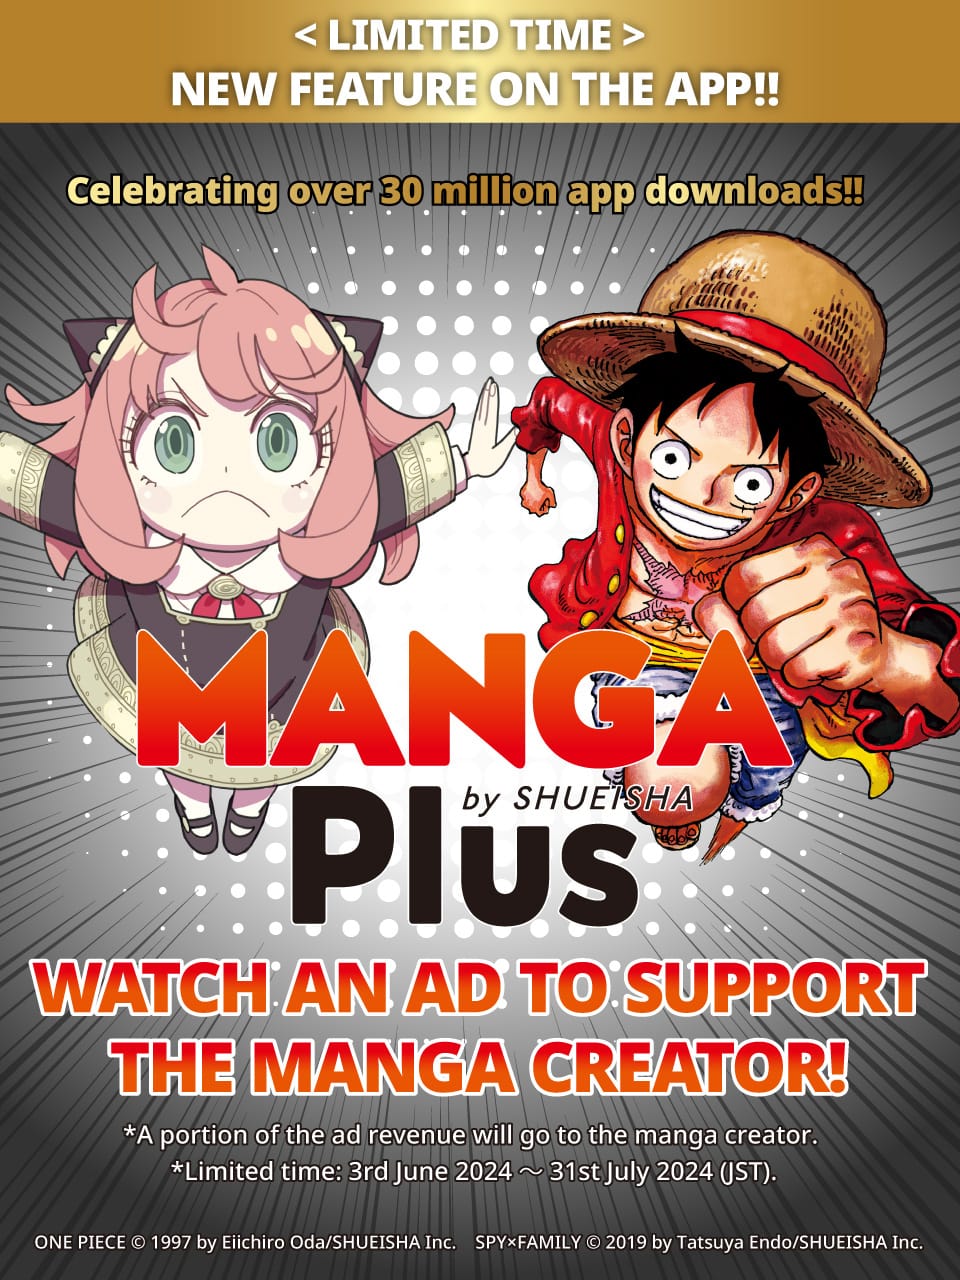 MANGA Plus by SHUEISHA Celebrates 28 Million App Downloads with New Feature To celebrate this significant achievement, MANGA Plus is introducing a new limited-time feature that allows users to support their favorite manga creators by watching ads. This feature is available in all nine languages supported on the app and can be accessed by users worldwide. New Feature: Watch Ads to Support Manga Creators Starting from June 3rd, 12 pm (JST), or 3 am (GMT), users will have the option to watch an advertisement after reading a chapter on the MANGA Plus app. A portion of the ad revenue generated will be directly distributed to the respective manga creators. This initiative aims to highlight and support the manga creators who pour their hearts and souls into their work. It also provides overseas readers with a direct way to show their support and bridges the gap between them and the manga creators. This initiative is possible because MANGA Plus is a service run directly by the editorial team in Japan. How It Works: Read a Chapter: Read a chapter on the MANGA Plus app as usual. Watch an Ad: At the end of the chapter, there will be a prompt to watch an ad. Support Creators: A portion of the ad revenue goes directly to the manga creator. Continue Reading: Read more from the same creator, or find a new title and manga creator to support. A Message from Deputy Editor-In-Chief Momiyama: “We are thrilled to have reached 28 million downloads and are incredibly grateful to our dedicated user base,” said Deputy Editor-In-Chief Momiyama. “Manga creators put their everything into creating manga with the help of editors. However, it’s only because of the fans that we can continuously create new stories. With this new feature, users can watch an ad to support their favorite manga creator. We hope that this new feature will allow users to connect more with our platform, and have their voices heard by the manga creators and editors in Japan.” About MANGA Plus by SHUEISHA: MANGA Plus by SHUEISHA is operated directly by the editorial department in Japan, ensuring that what you read directly supports the creators. The platform hopes to reach many fans and help readers discover their new favorite manga to read. This new feature not only celebrates the app's success but also strengthens the connection between manga fans and creators, offering a simple yet impactful way for readers to contribute to the manga industry. Now Give me 3 15 words of summary lines from it and a catching Sub Heading